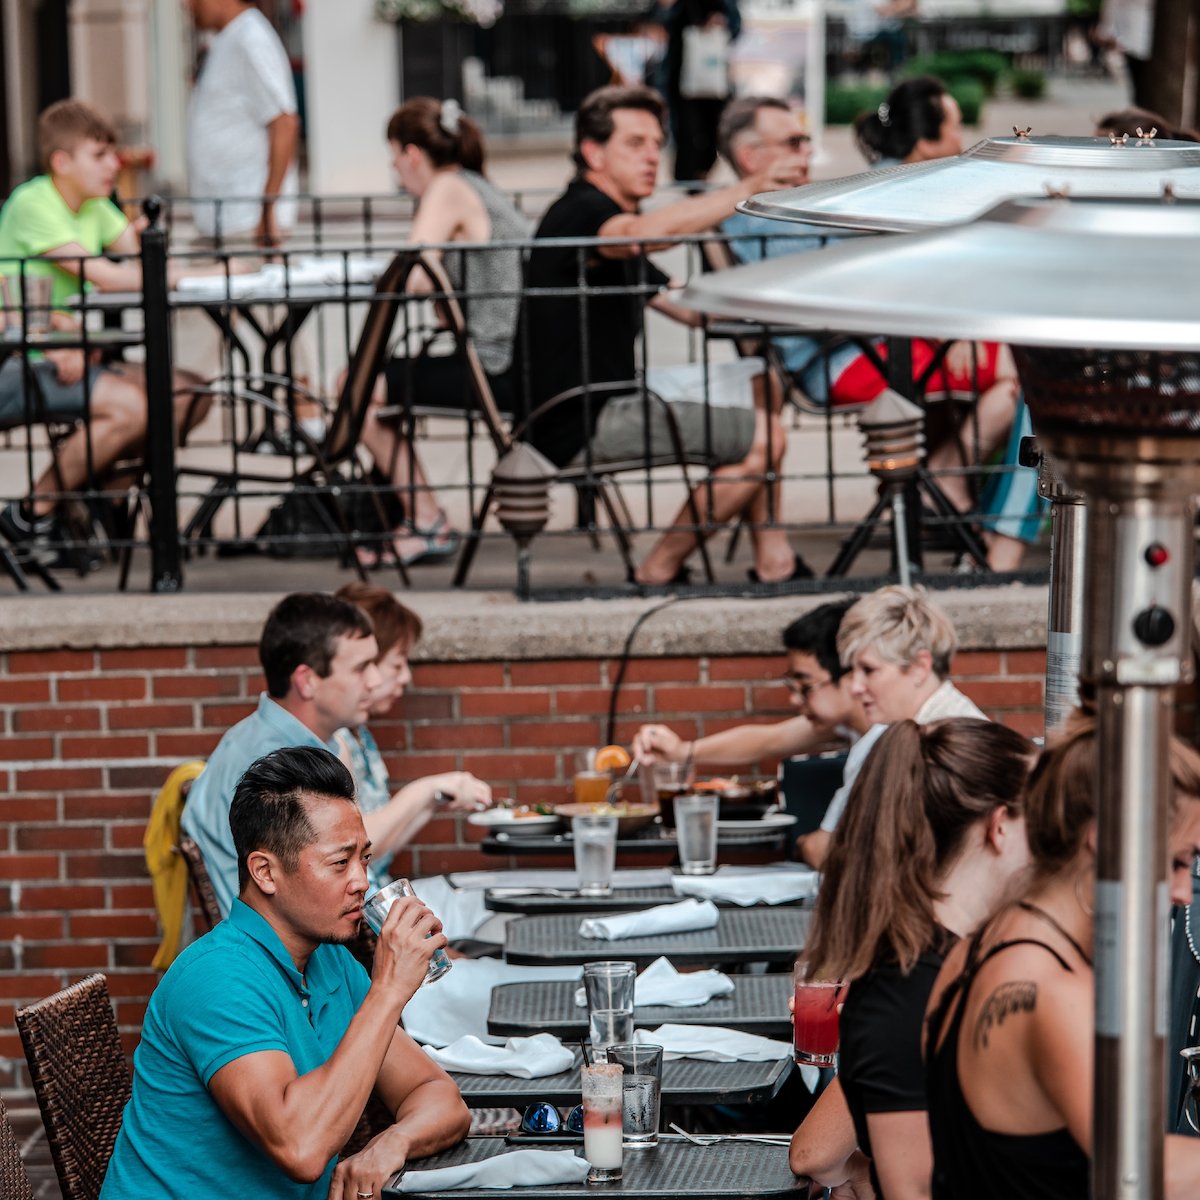 Patio season is here, and Get Gigs is bustling with opportunities! Open the app and explore the latest restaurant gigs near you. Enjoy the sunny days ahead while earning extra cash!